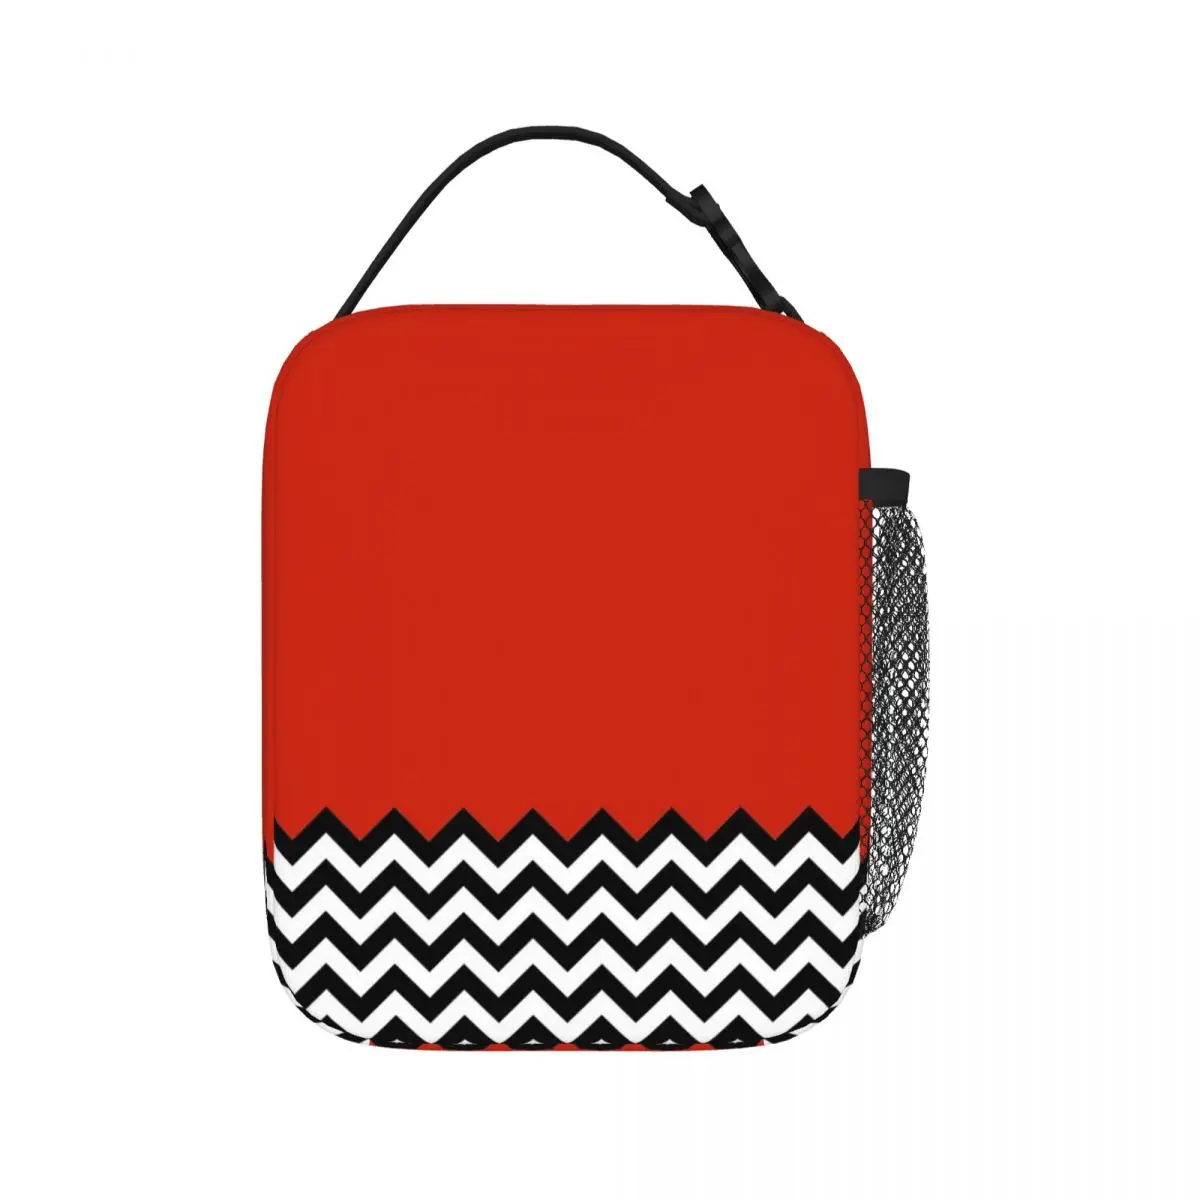 

Black Lodge (Twin Peaks) Inspired Graphic Insulated Lunch Bag Picnic Bag Thermal Lunch Box Lunch Tote for Woman Work Kids School